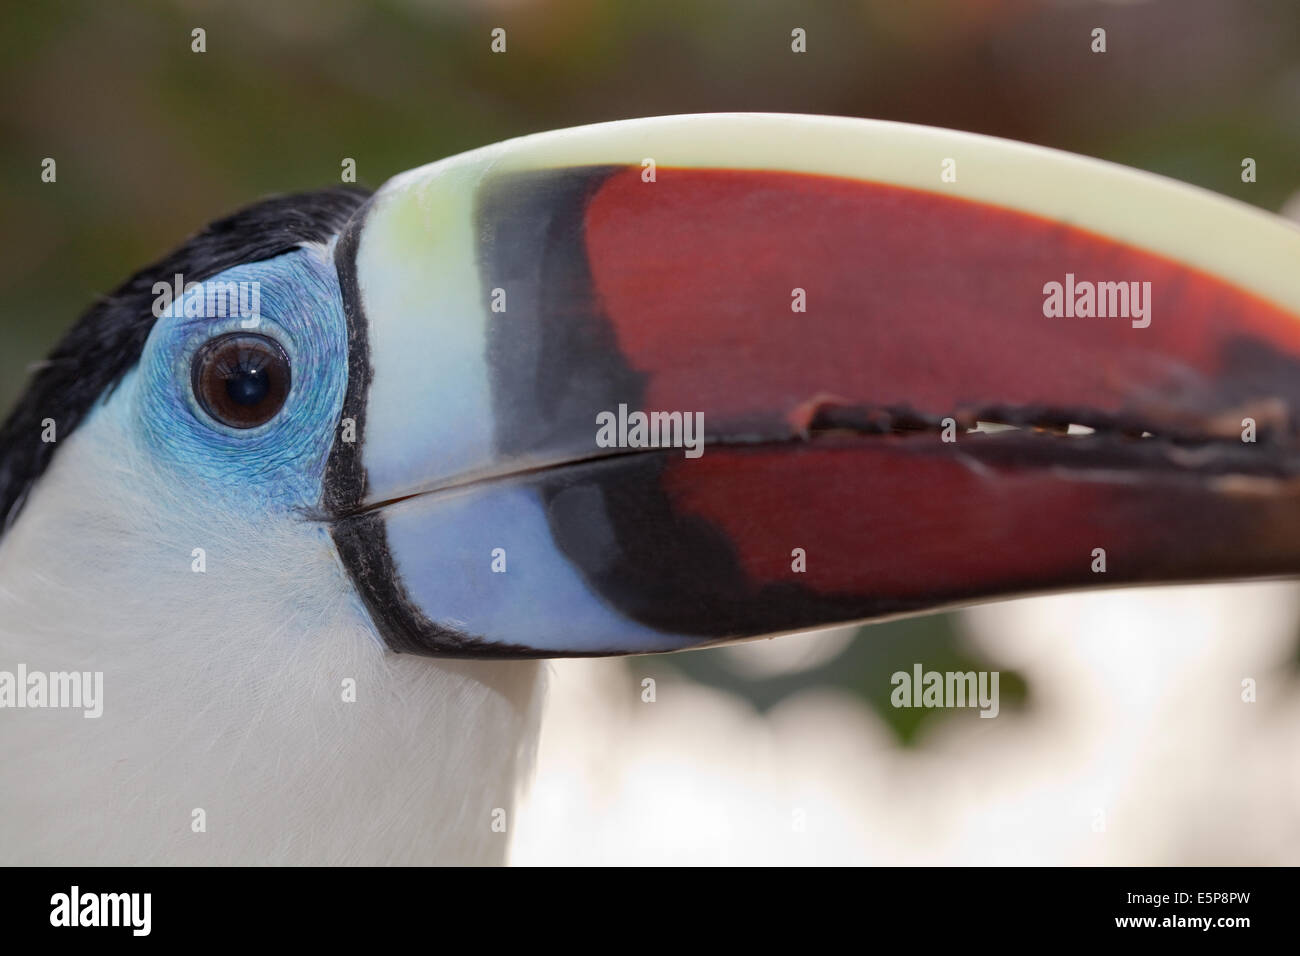 Red-billed, White-throated, or Cuvier's Toucan (Ramphastos tucanus). Stock Photo